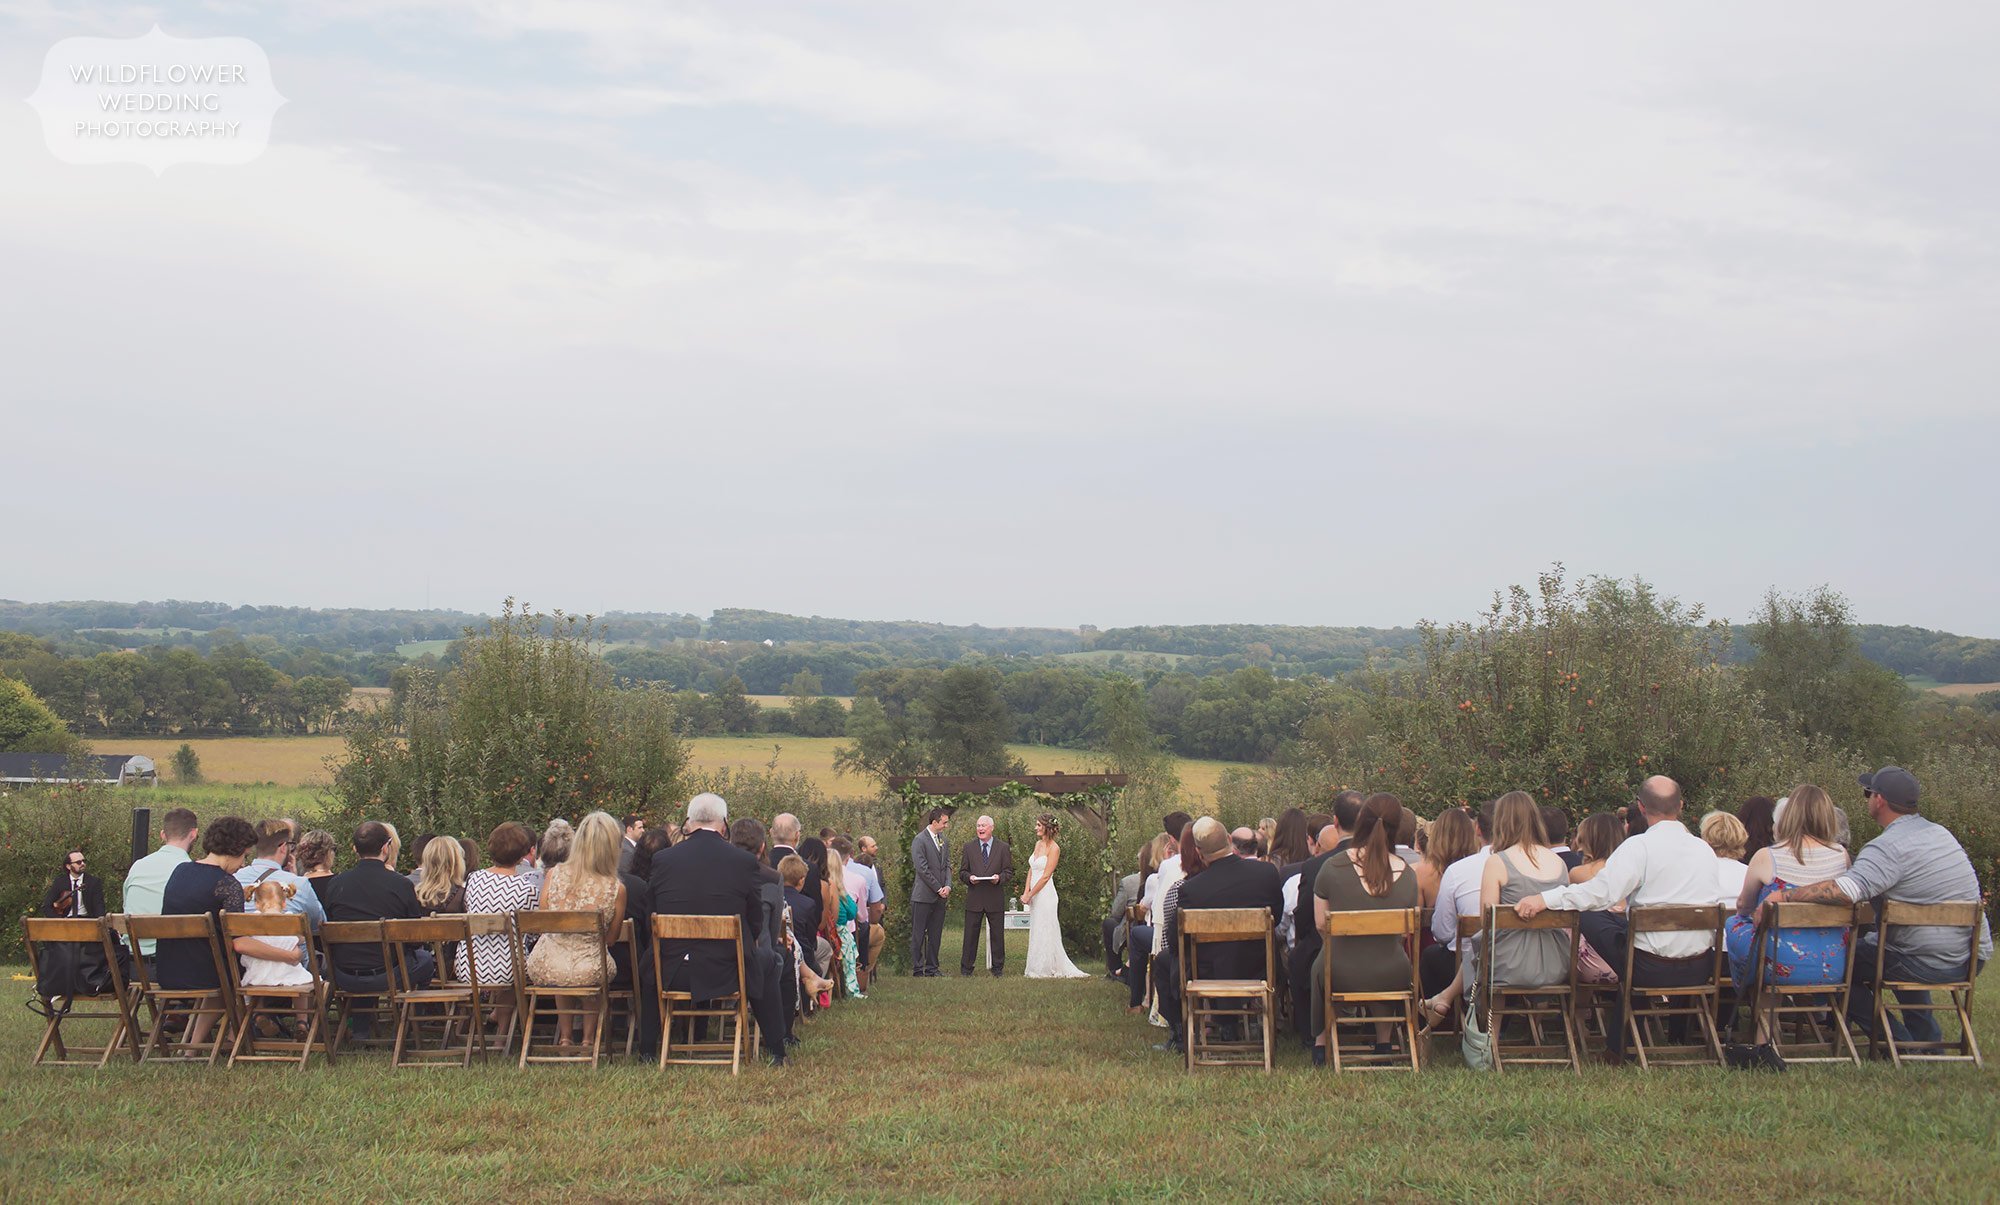 View of the outdoor ceremony space in the orchard at the Weston Red Barn Farm.